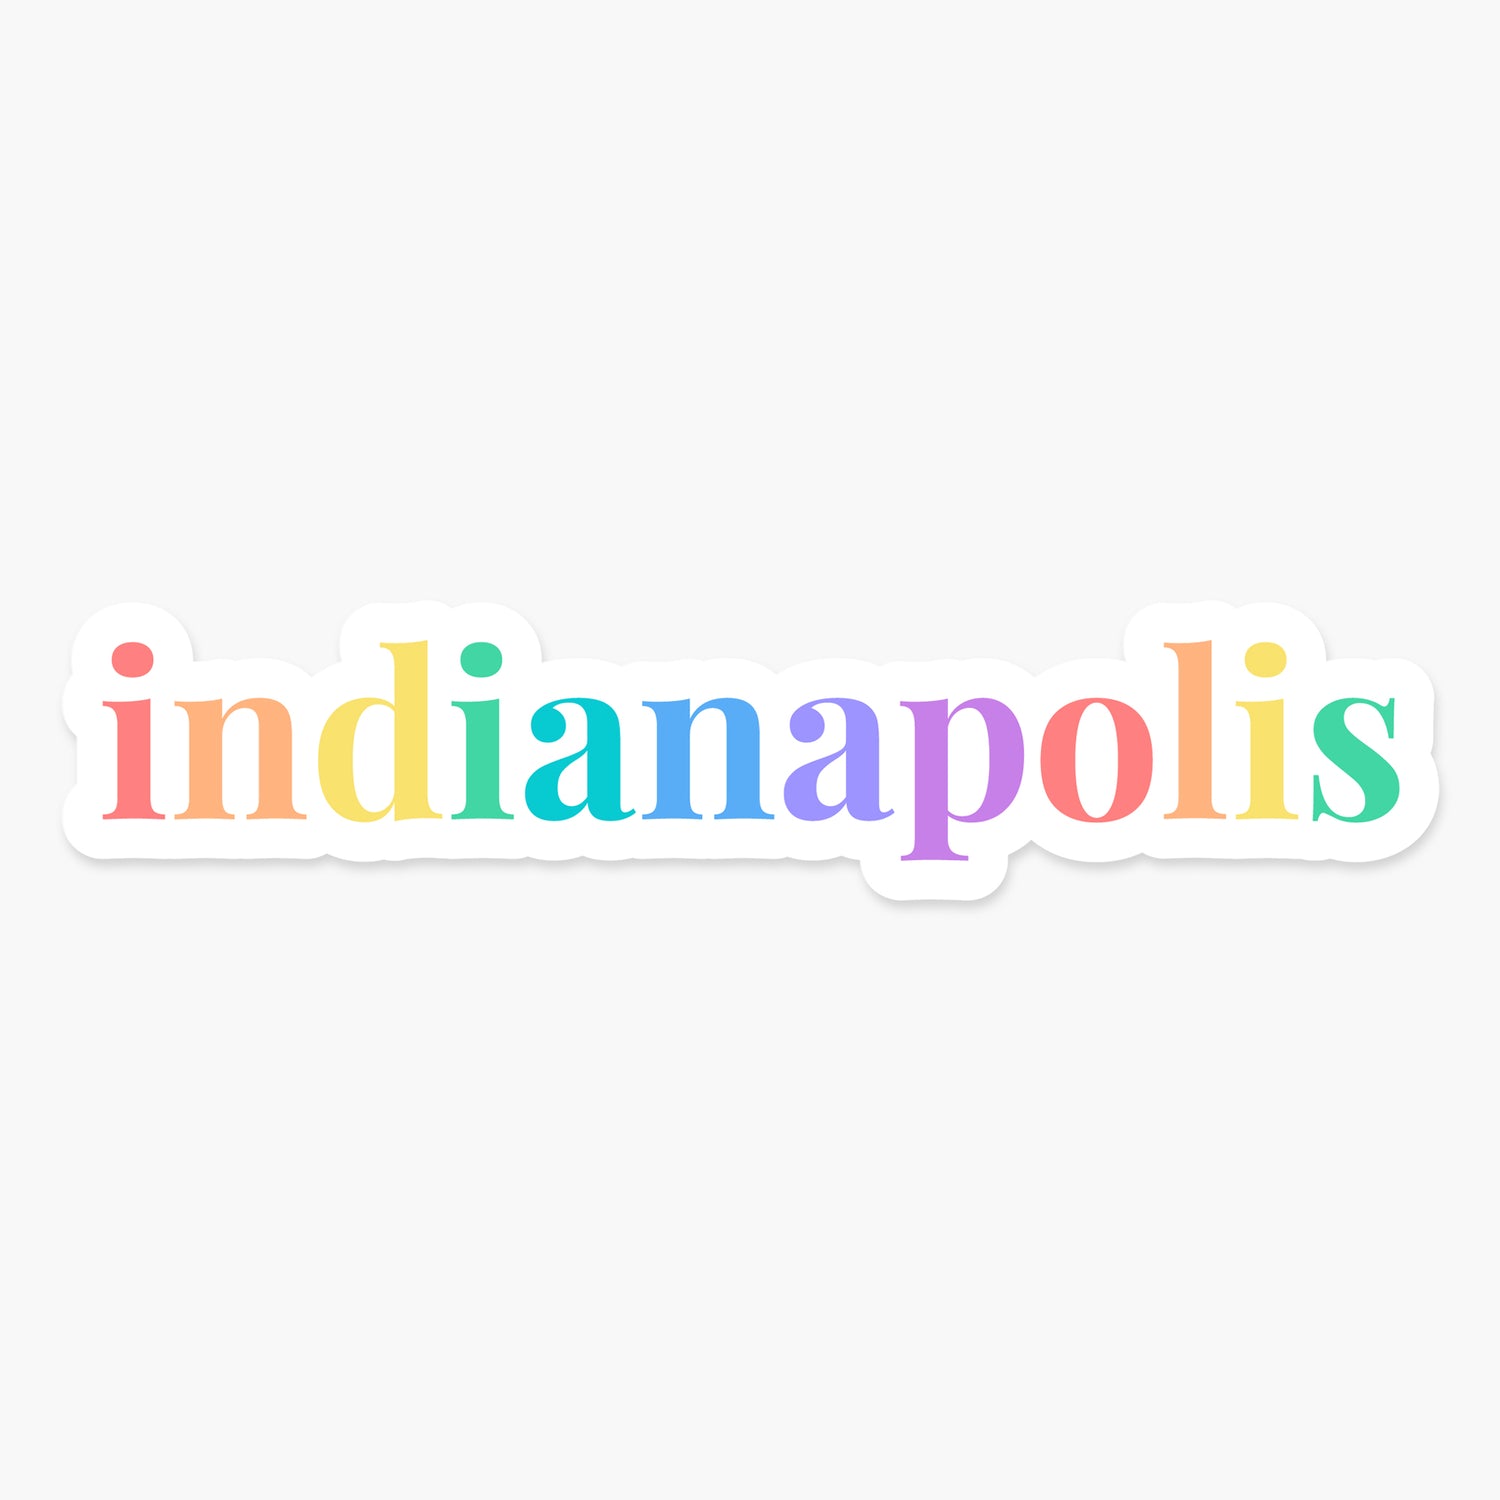 Indianapolis, Indiana - Everyday Sticker | Footnotes Paper